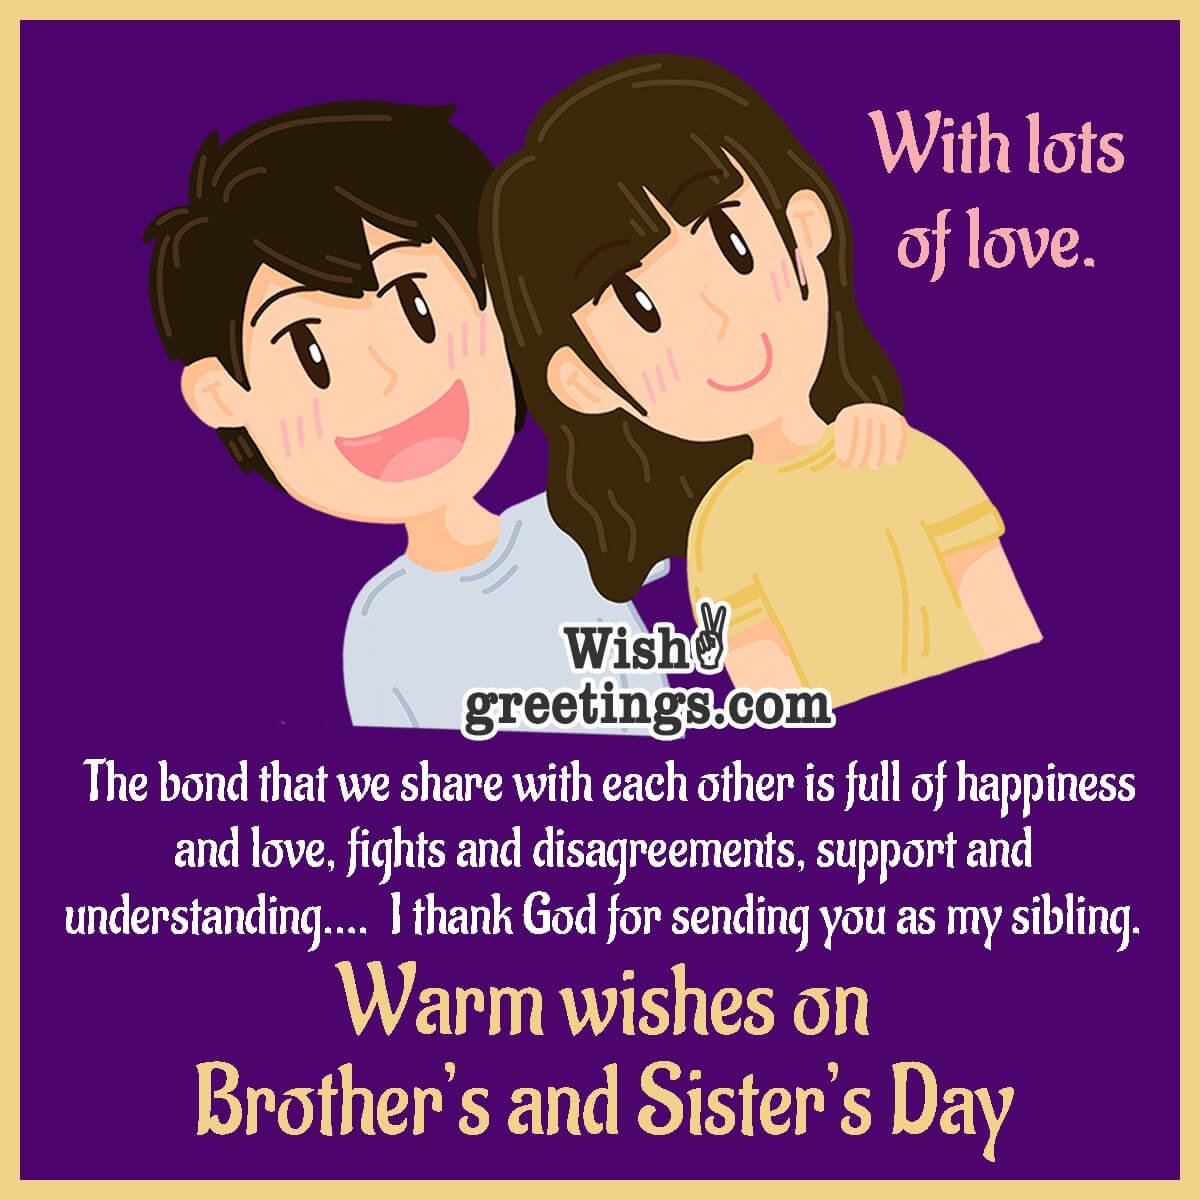 Brother’s and Sister’s Day Wishes Messages - Wish Greetings